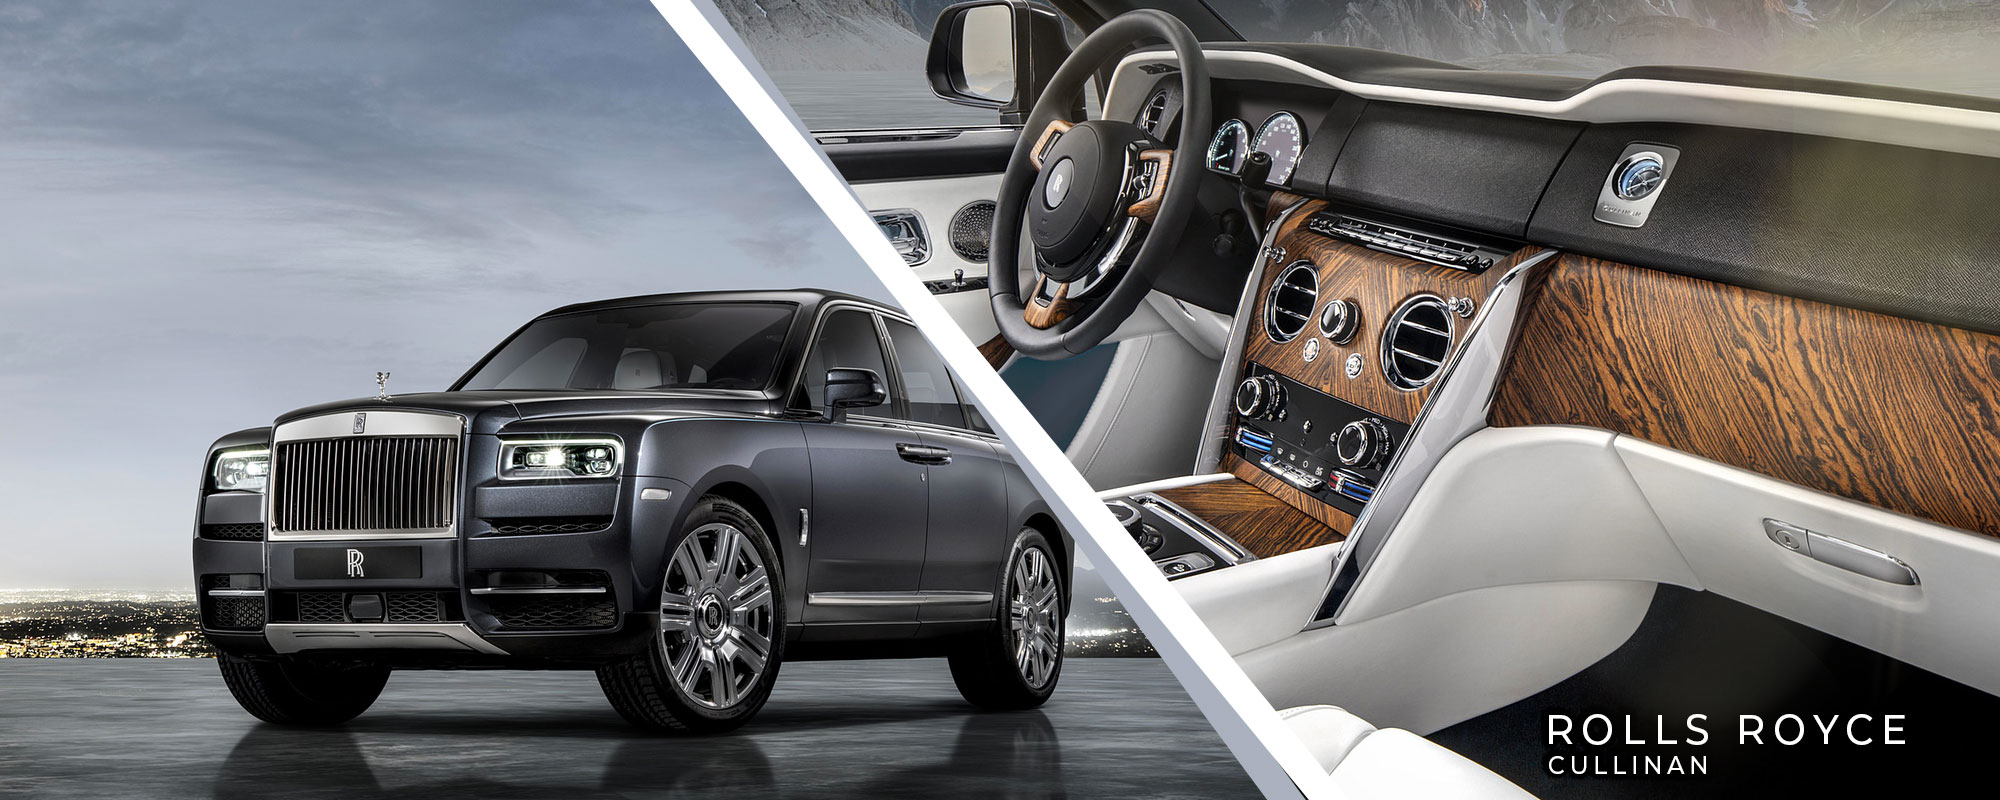 Starr Luxury Cars - Rolls Royce Cullinan Self-hire and Chauffeur service, where exclusivity meets the opulence with the best coveted and exotica cars, - UK, Berkeley square, Mayfair